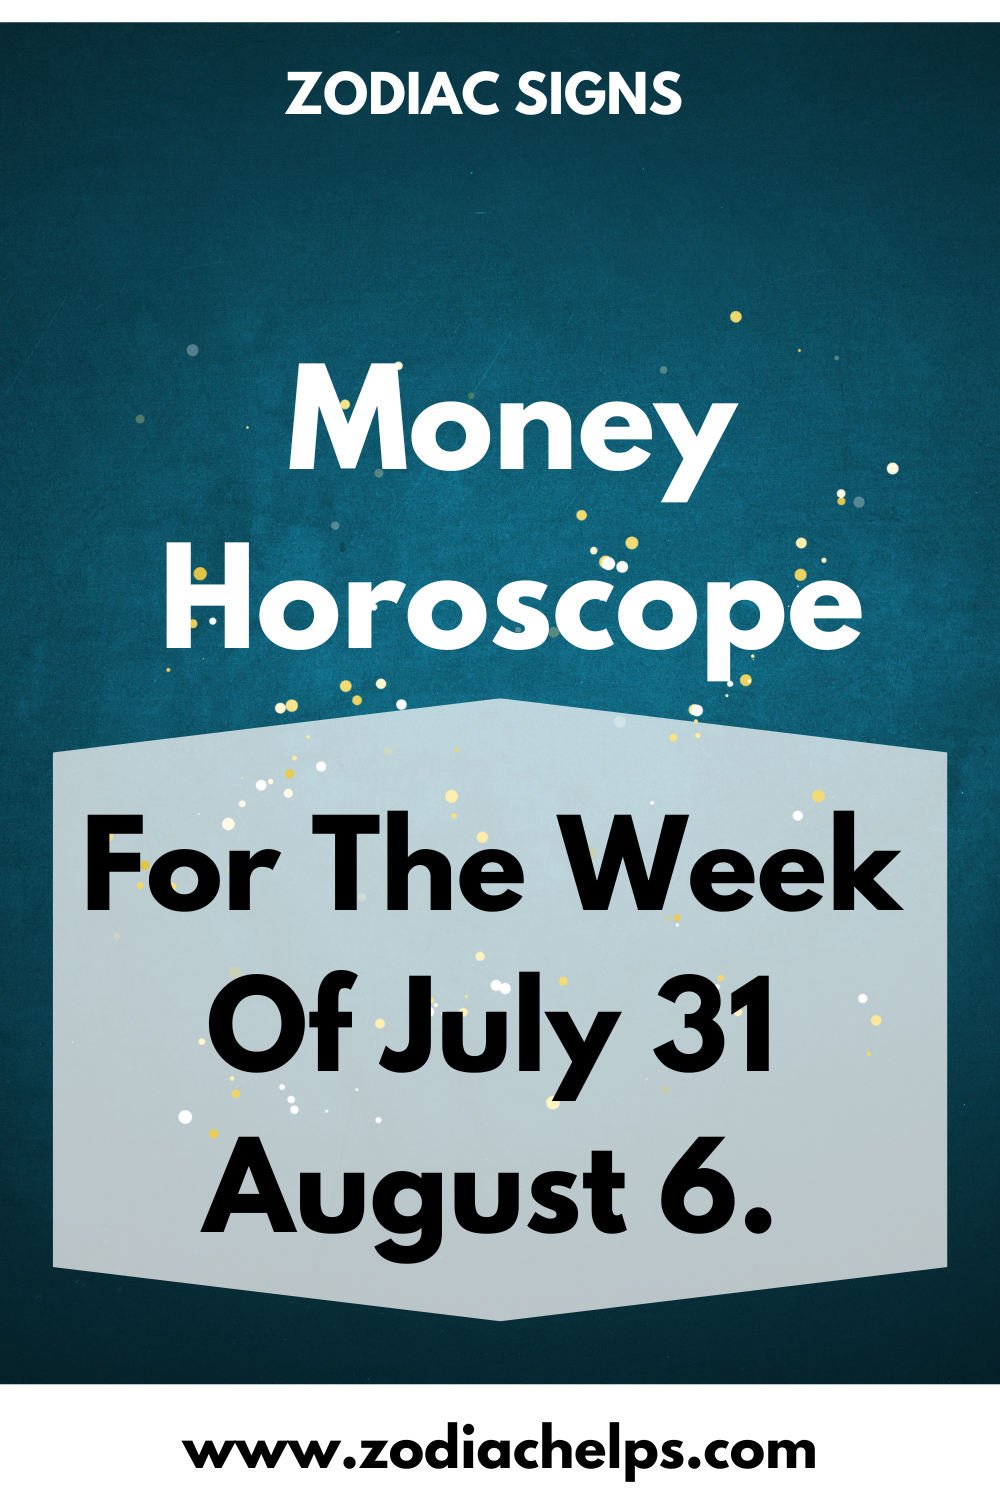 Money Horoscope For The Week Of July 31 August 6.